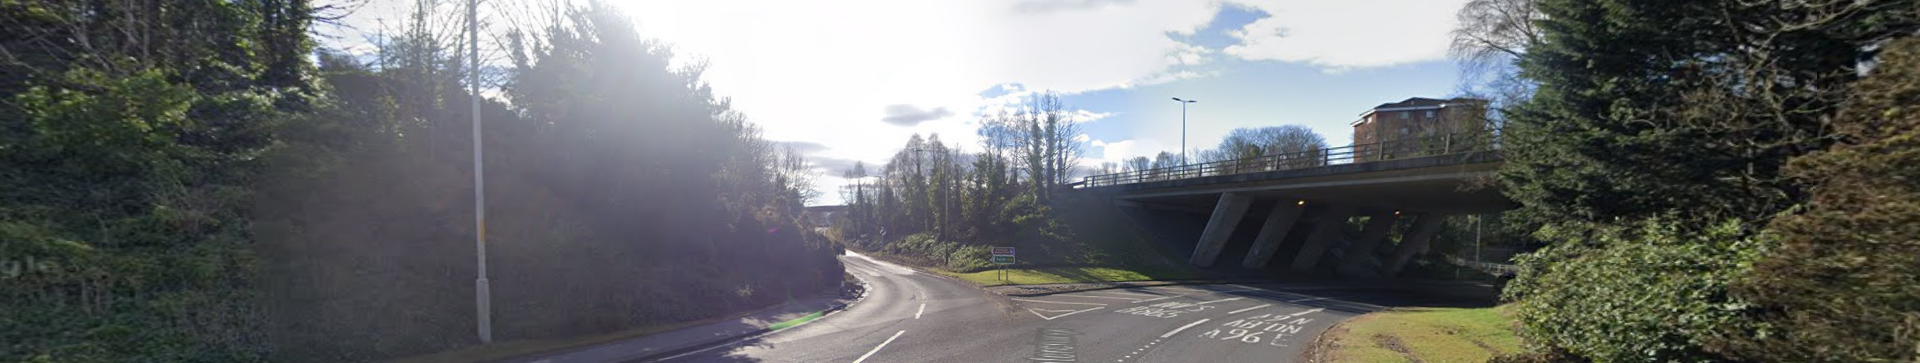 OVERNIGHT ROAD SAFETY IMPROVEMENTS PLANNNED FOR THE A9/A96 RAIGMORE INTERCHANGE, INVERNESS